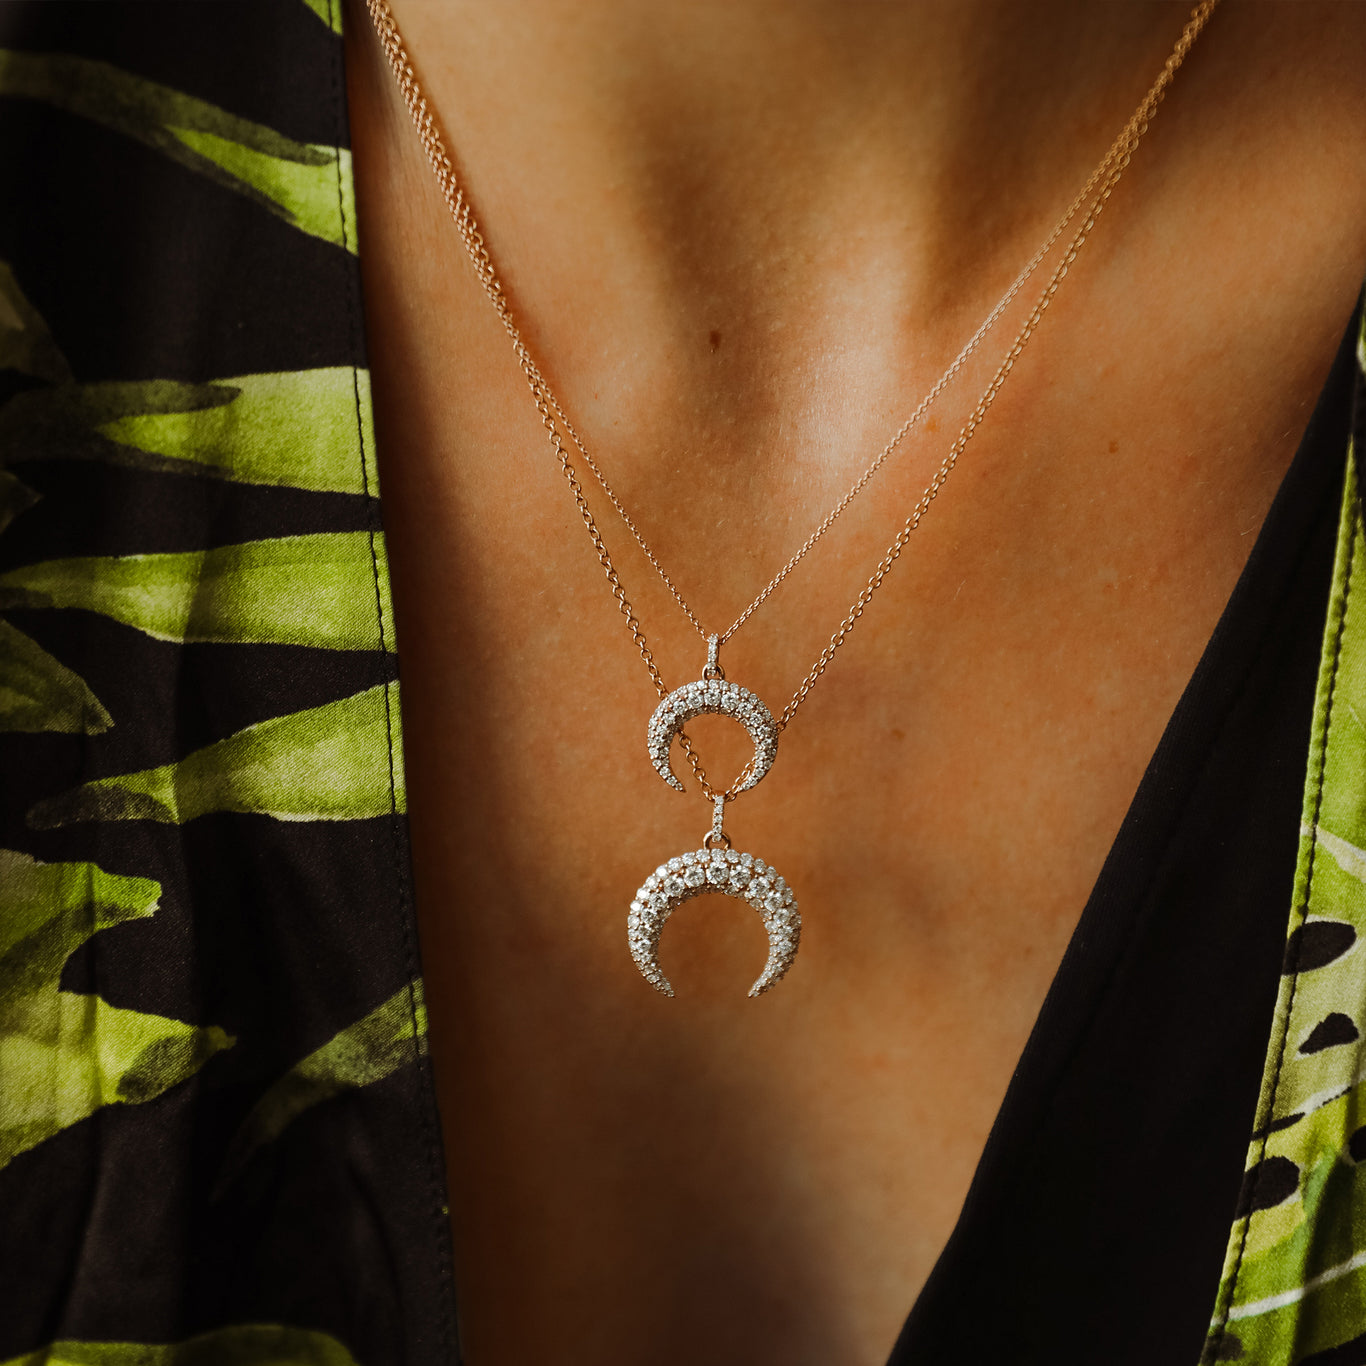 The Diamond Dharma shown paired with the Mini Diamond Dharma Necklace. Both necklaces are rose gold.